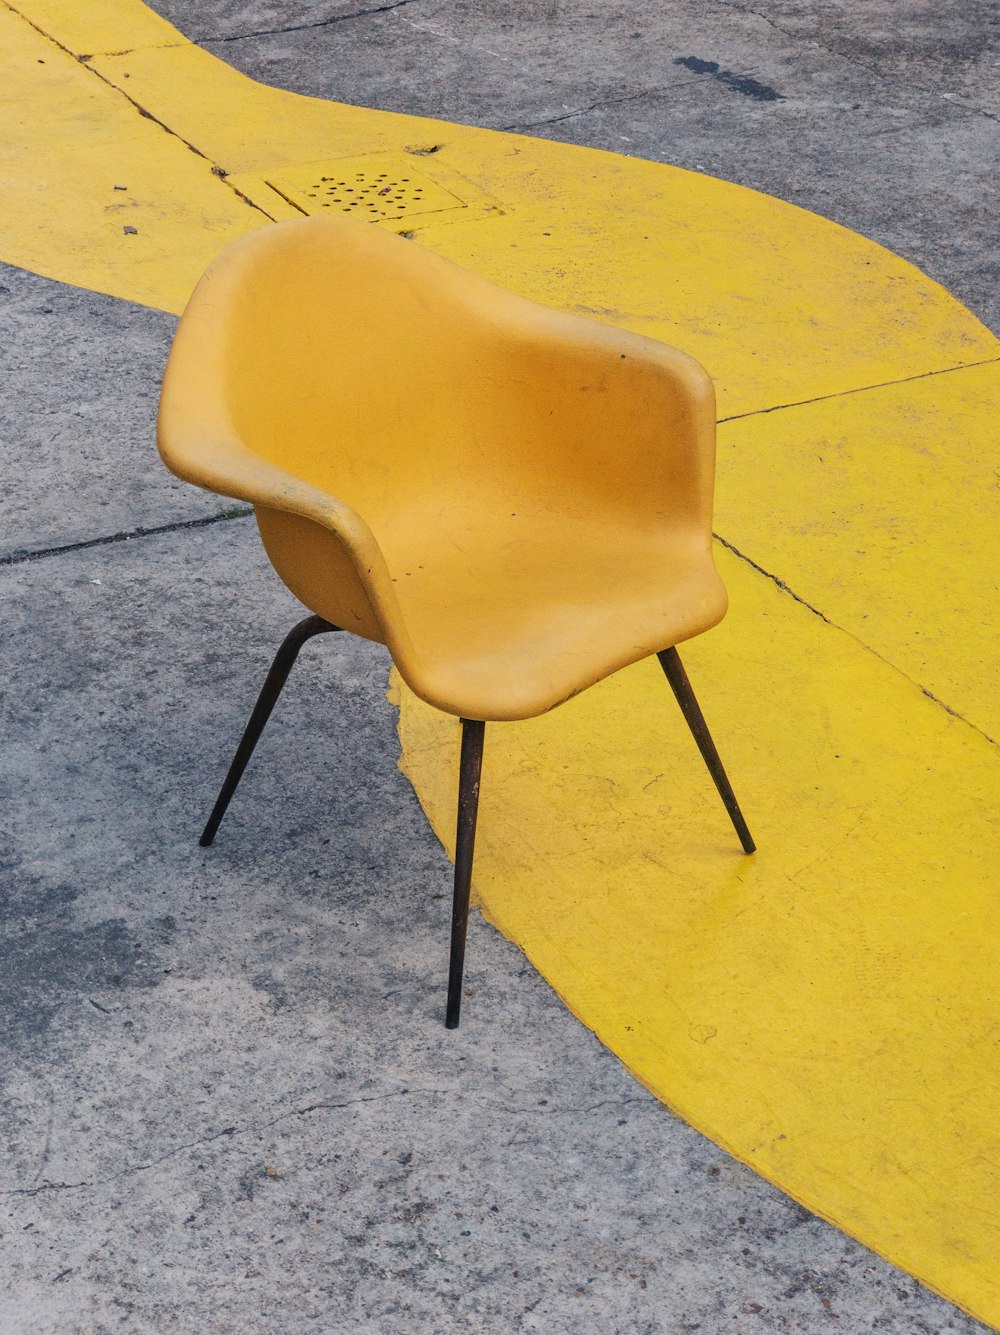 yellow plastic chair on yellow and gray concrete surface